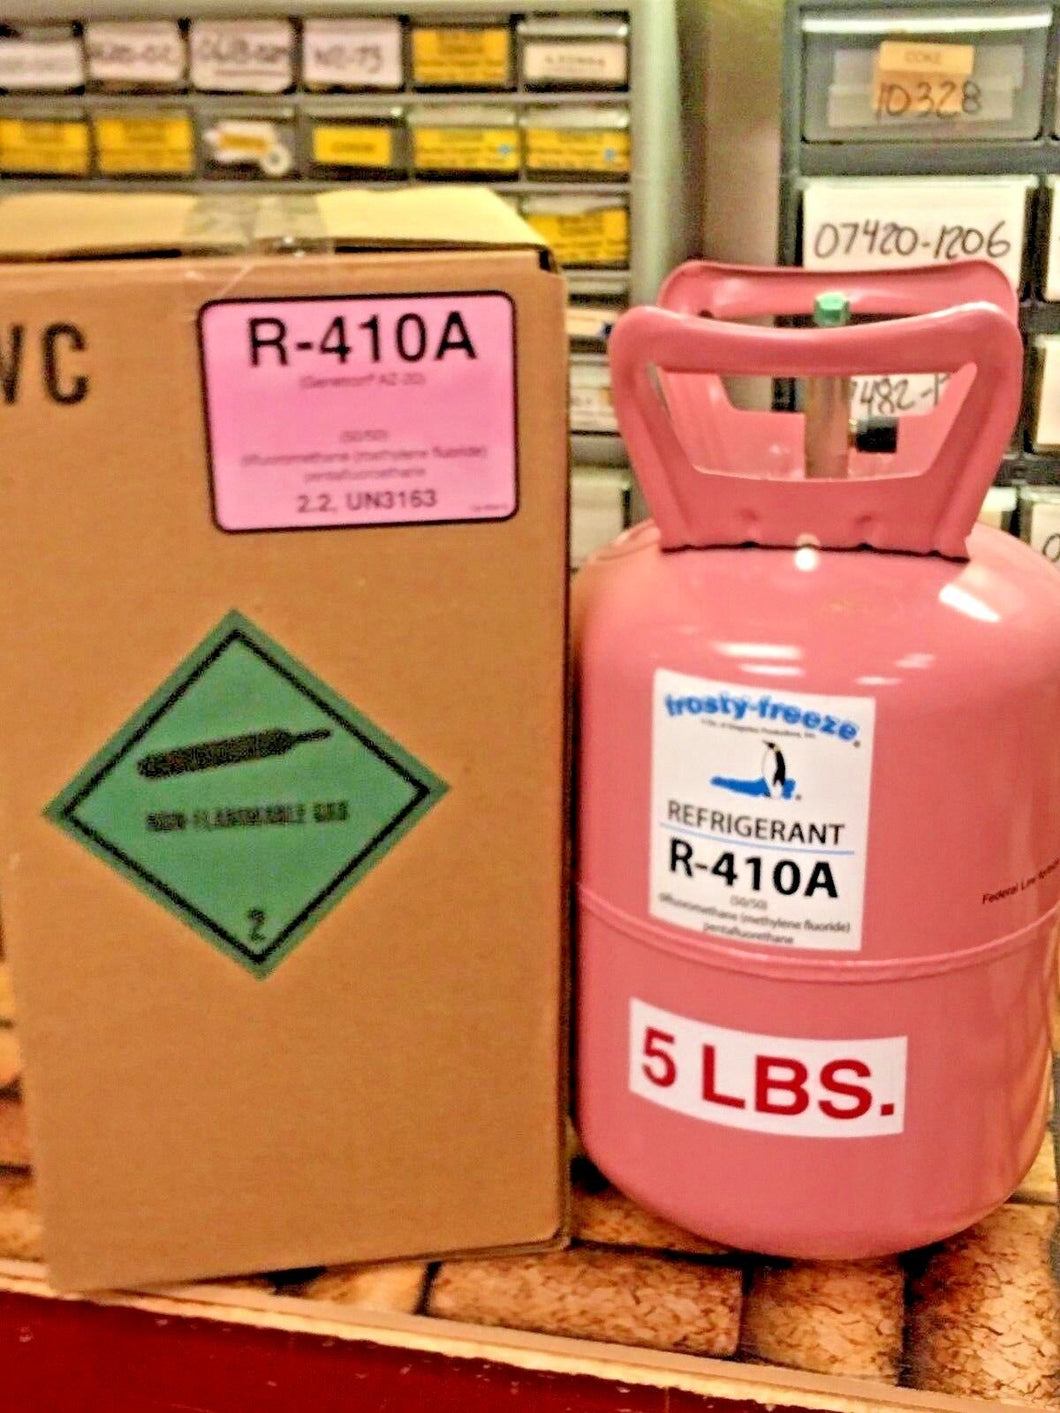 R410a, Refrigerant, 5 lb. Can, 410a, Best Value, FAST FREE SHIPPING